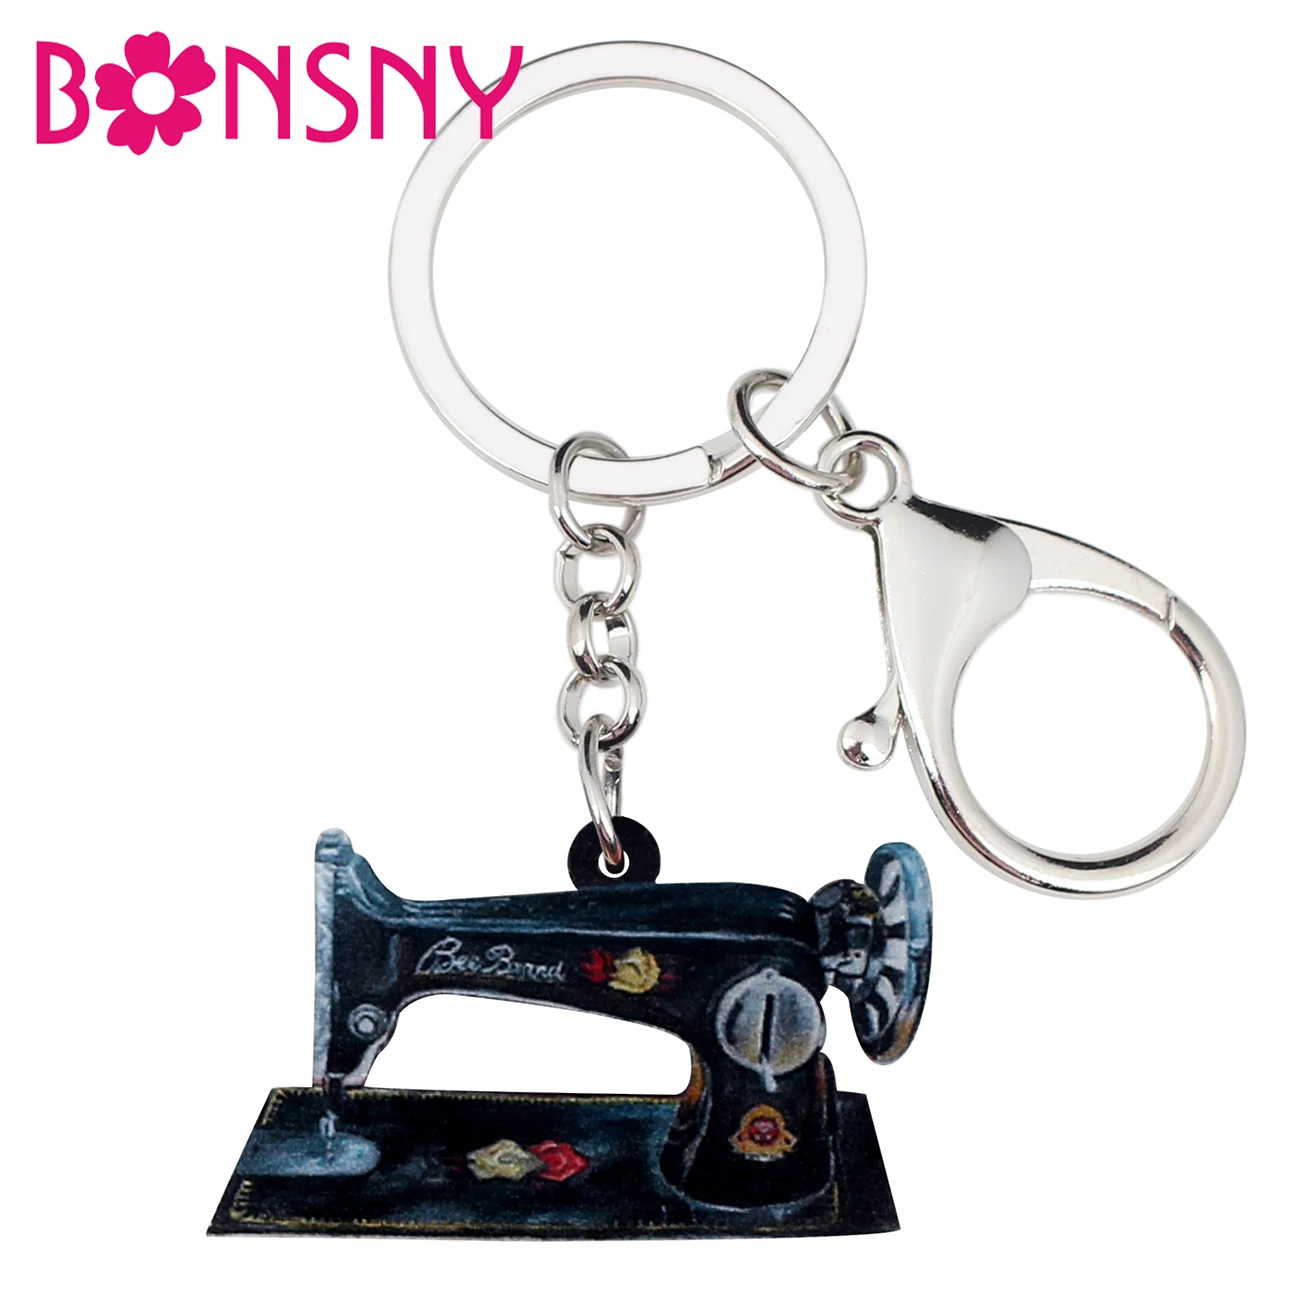 Enamel Metal Novelty Sewing Machine Key Chains For Women Girl Gift Car Purse bag Rings Charms 